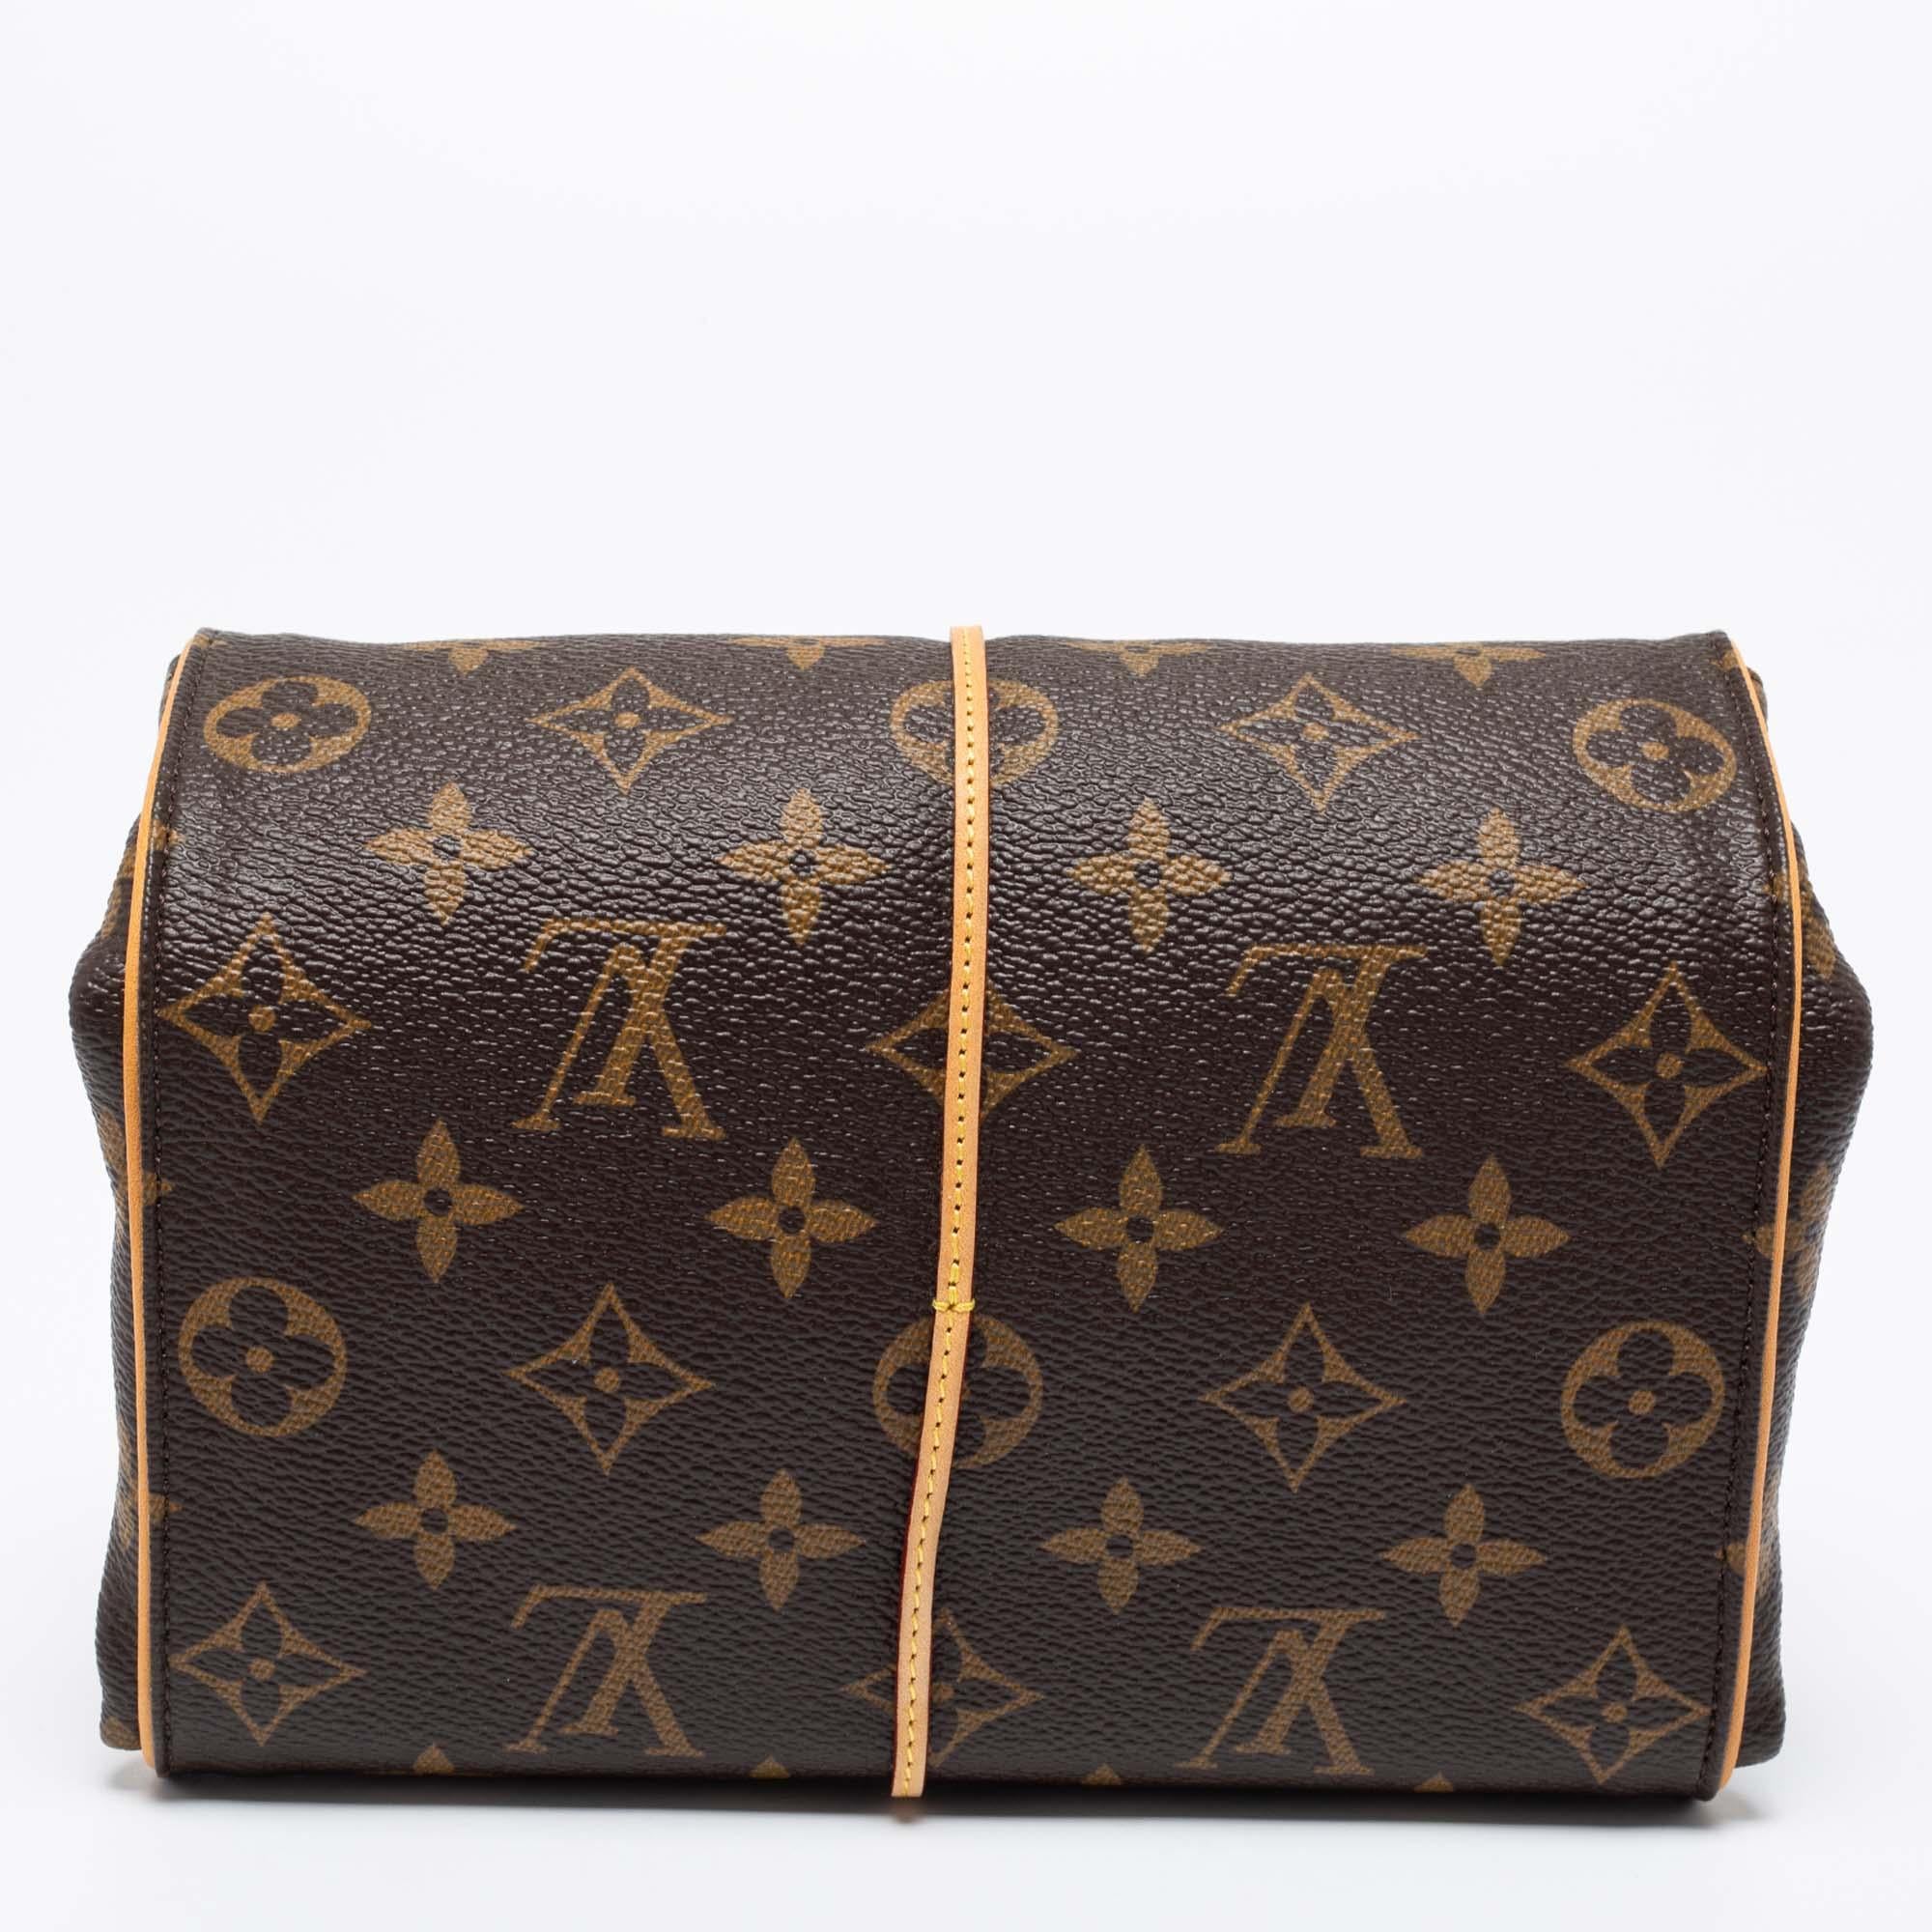 There's no better way to store your priceless collection of jewelry than this jewelry case from Louis Vuitton. Flaunting the Monogram canvas on its exterior, this case is built sturdily, with a simple tie at the front. This LV accessory is smart and